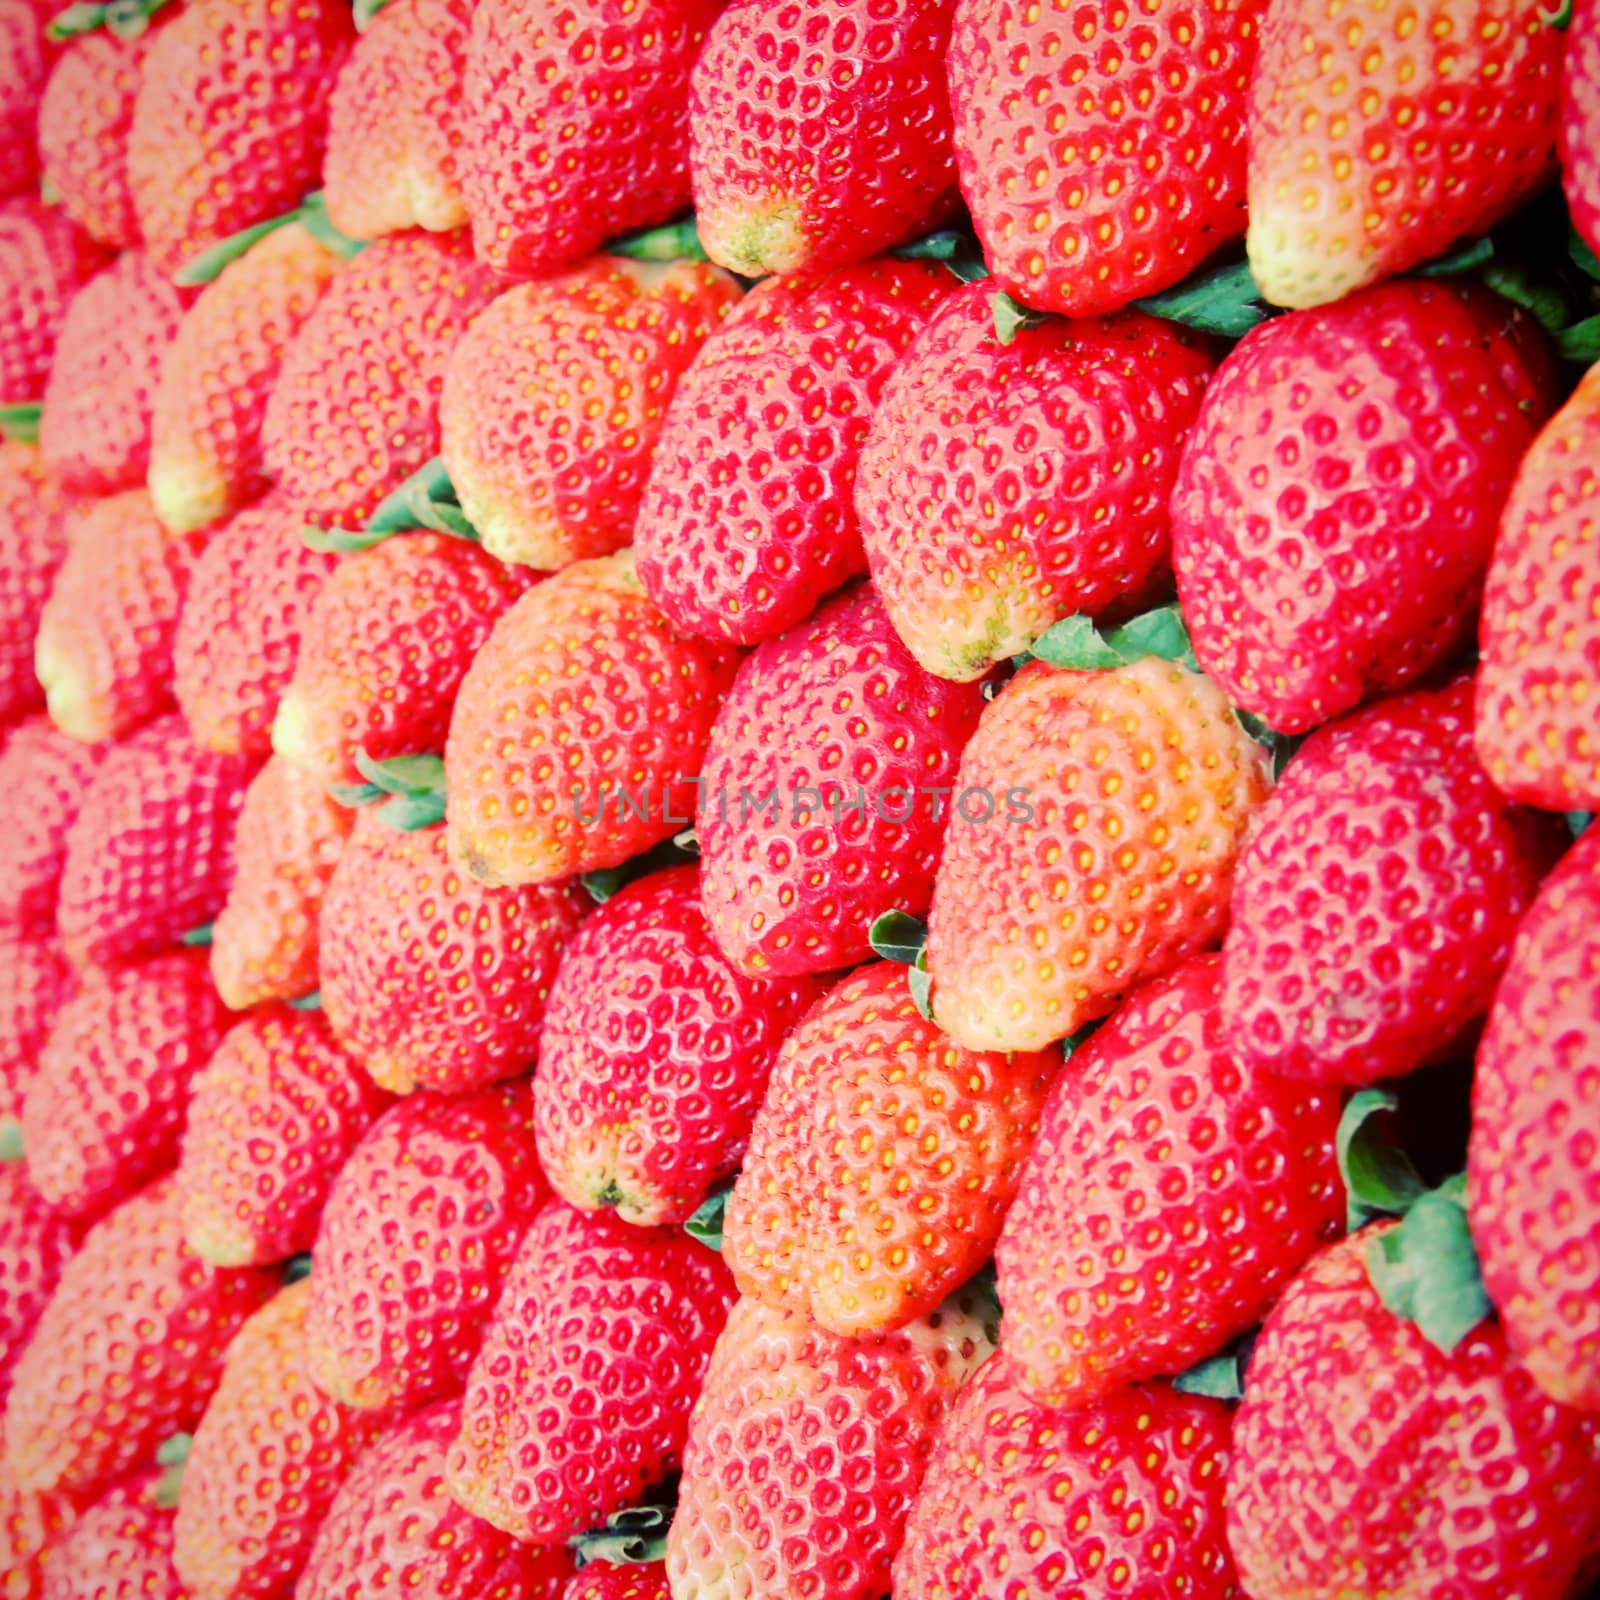 Row of fresh strawberry with retro filter effect by nuchylee